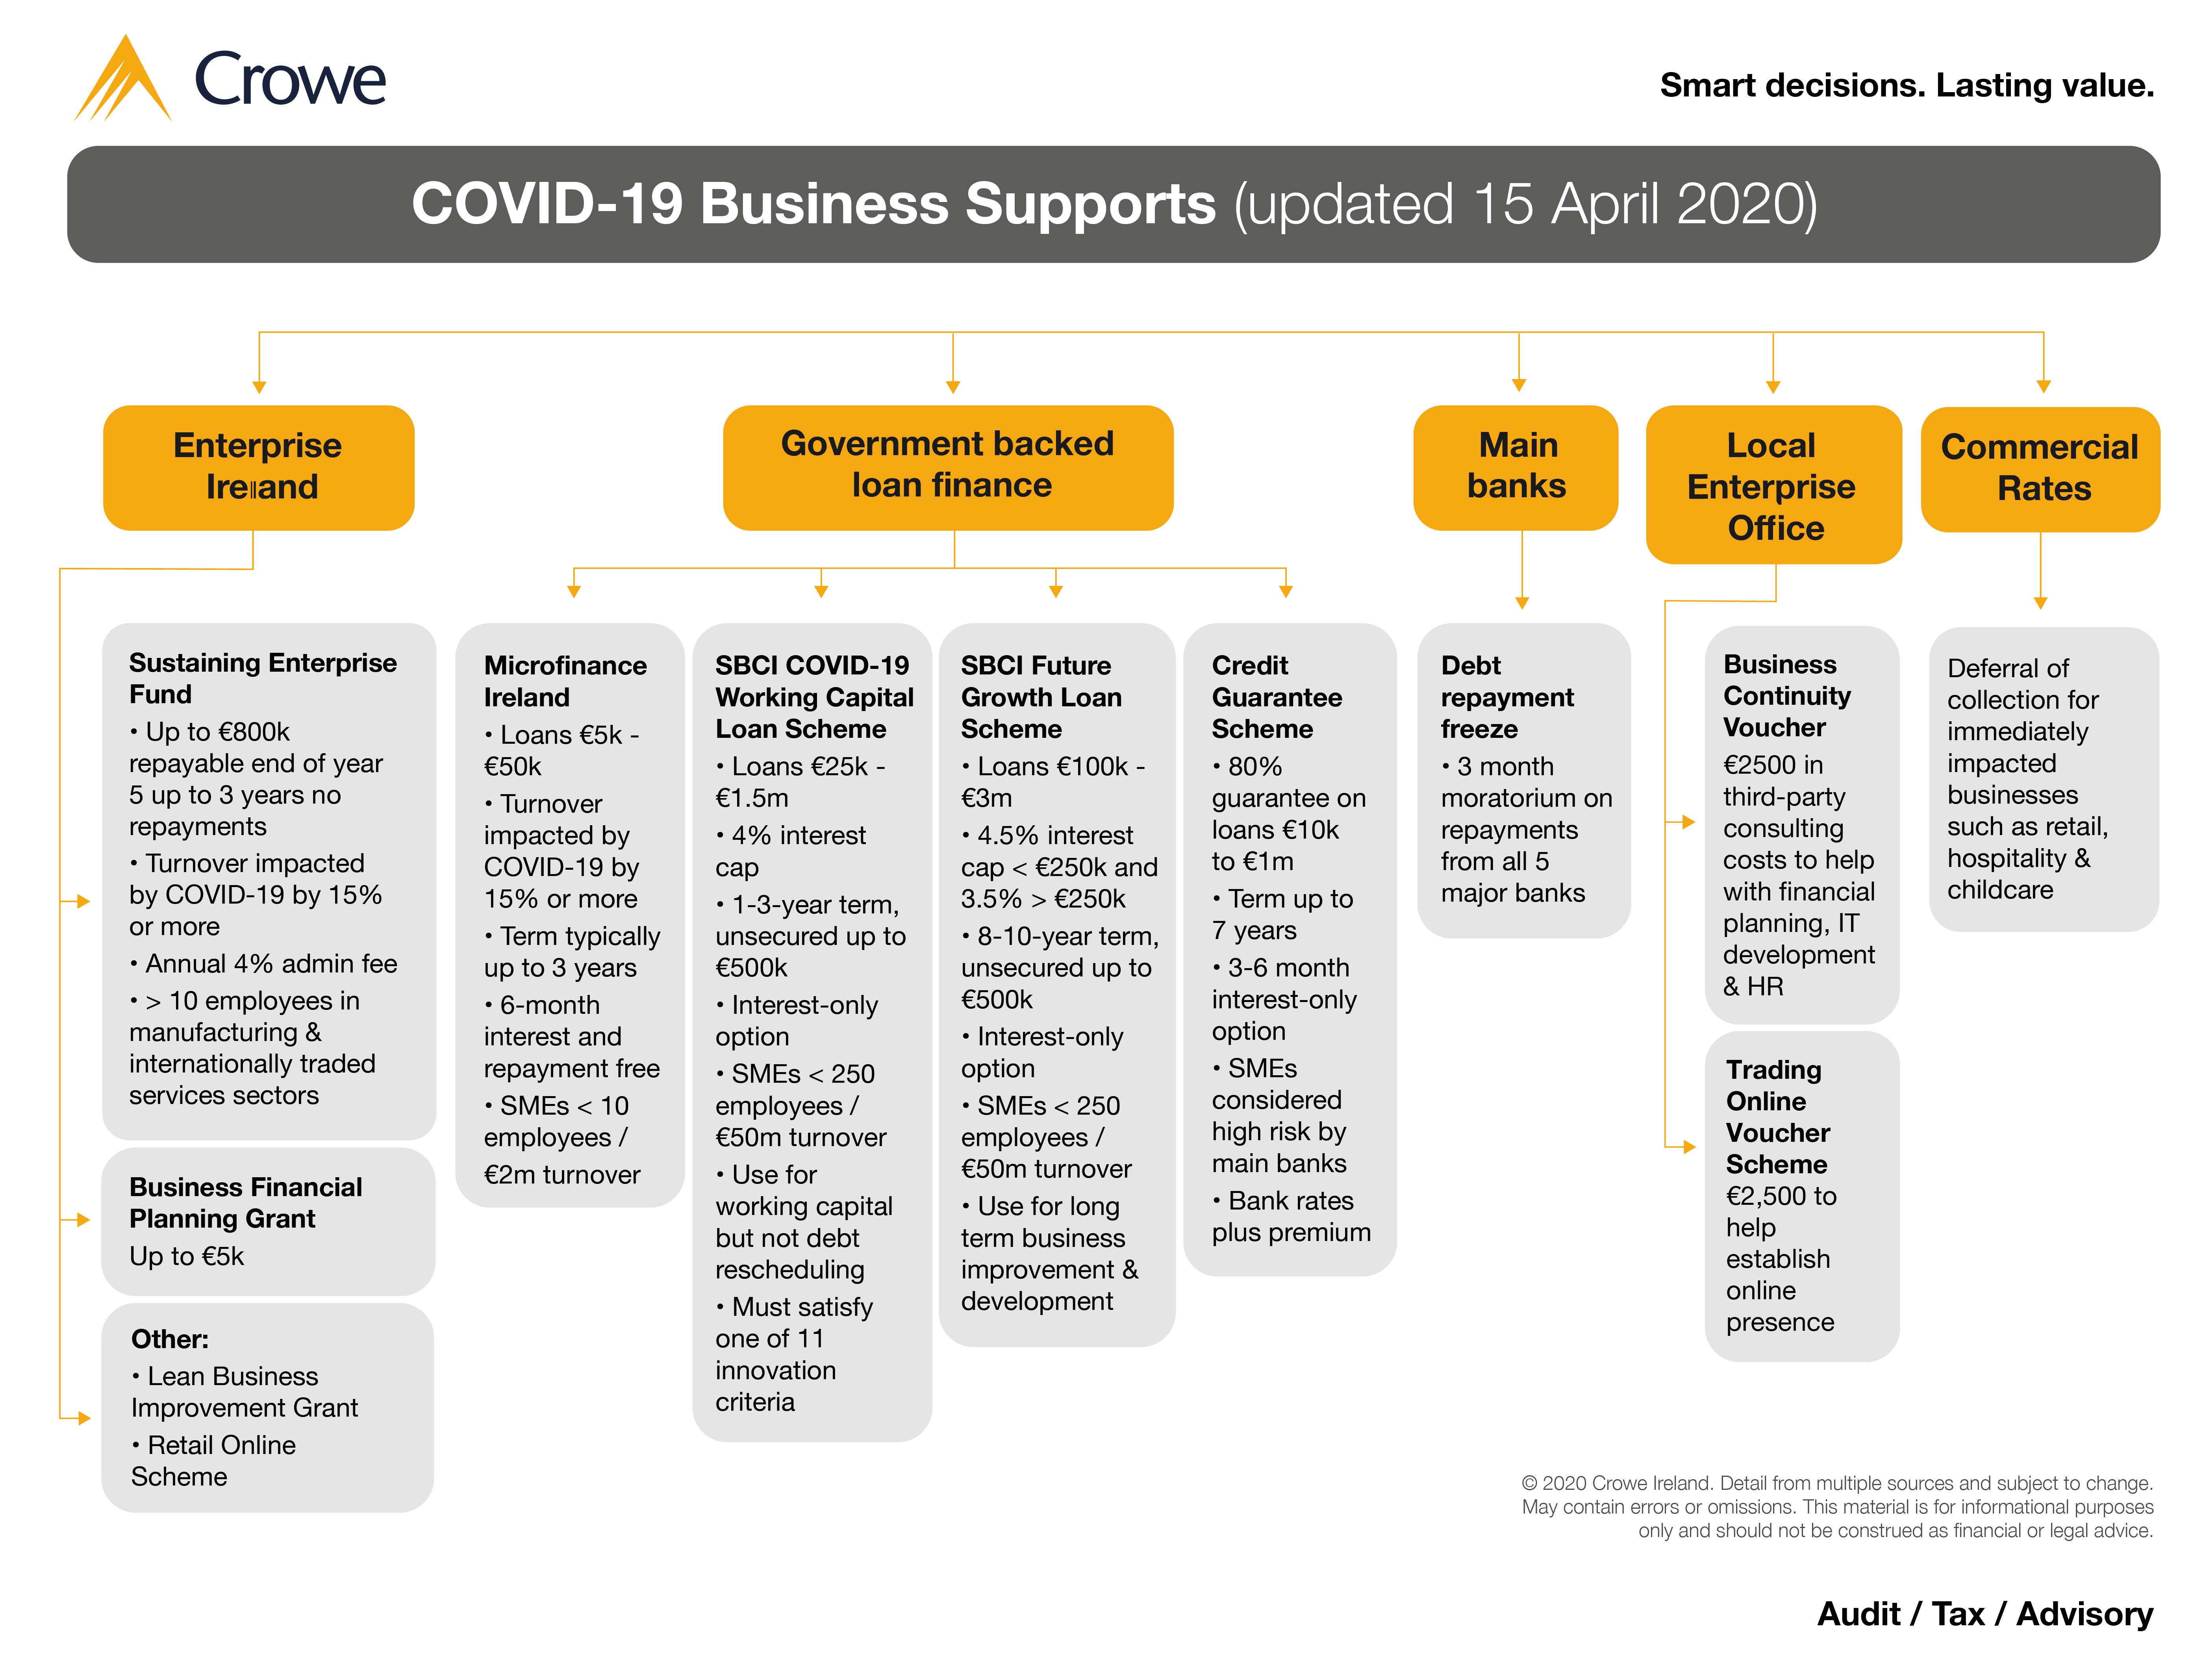 Overview chart of COVID-19 SME business supports - Crowe Ireland